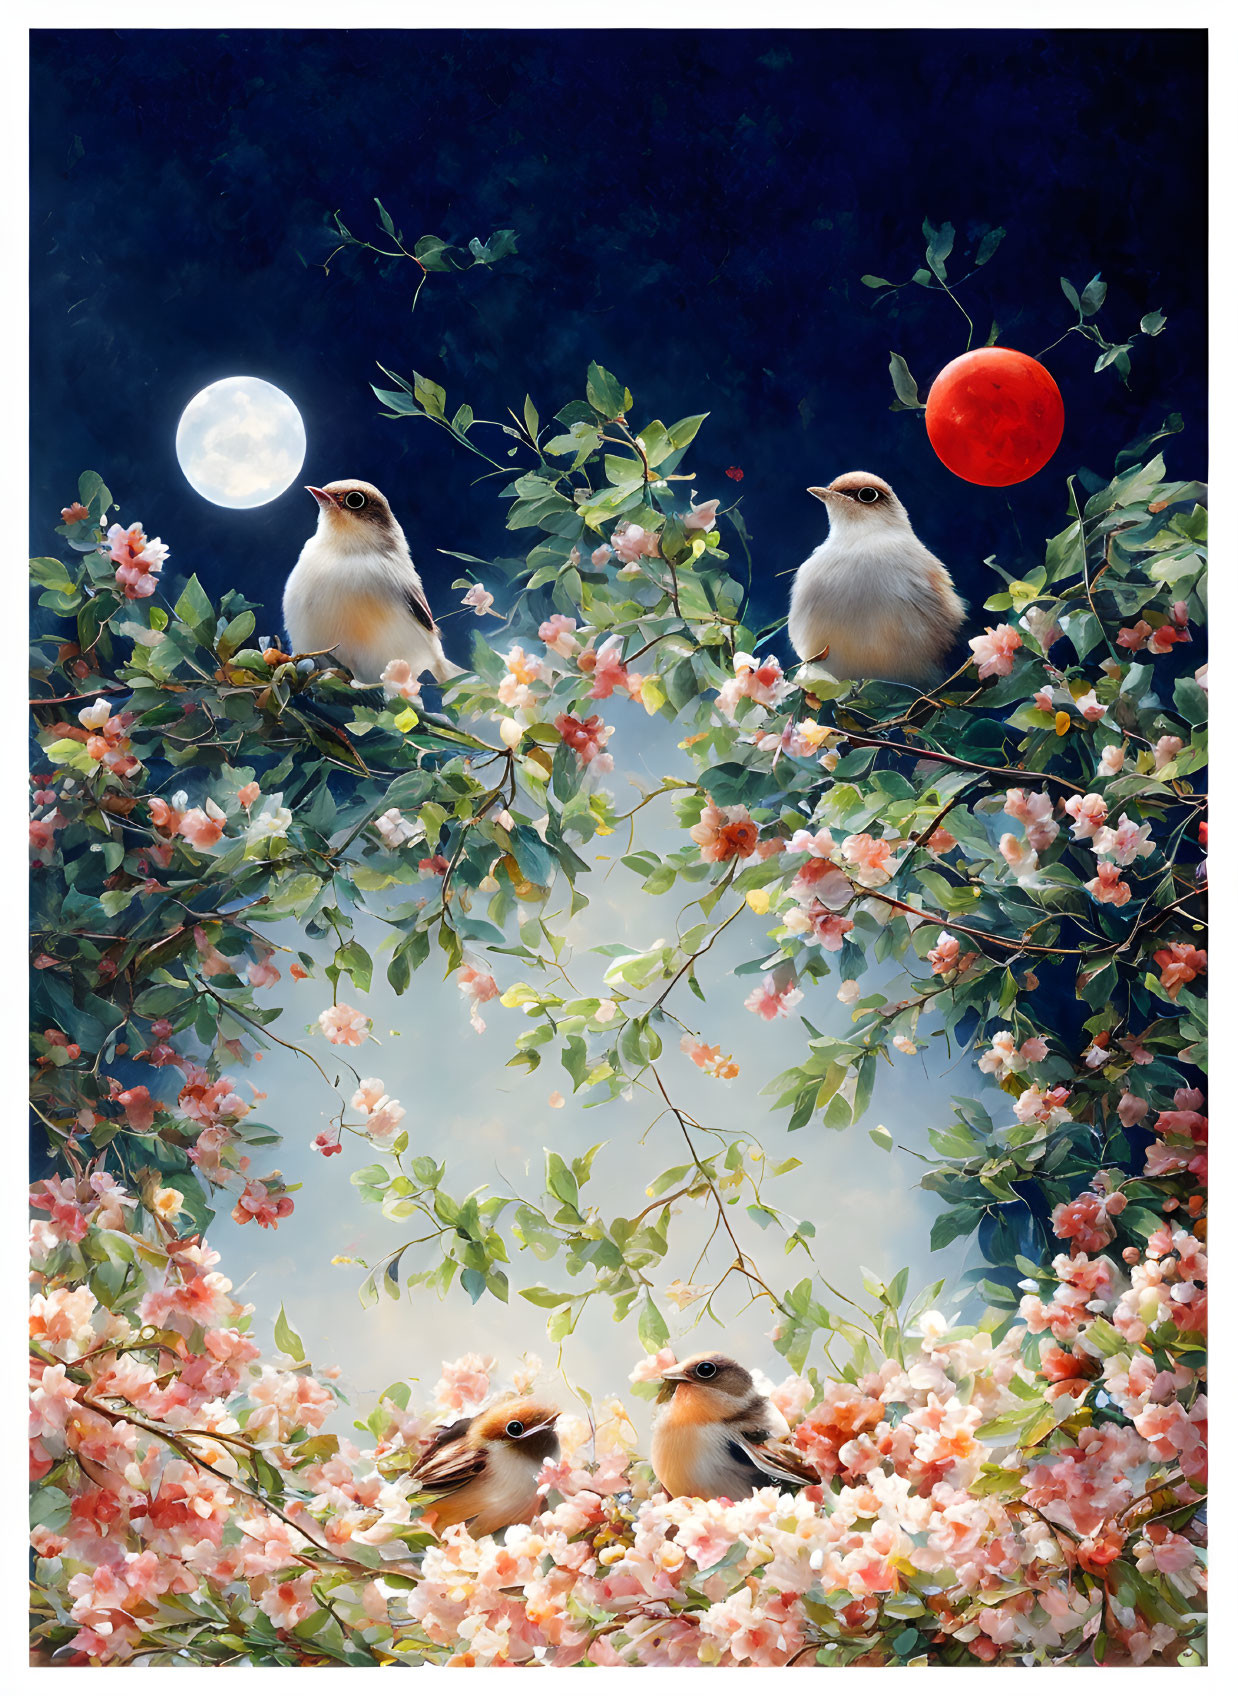 Four birds on flowering branches under white and red moonlit sky